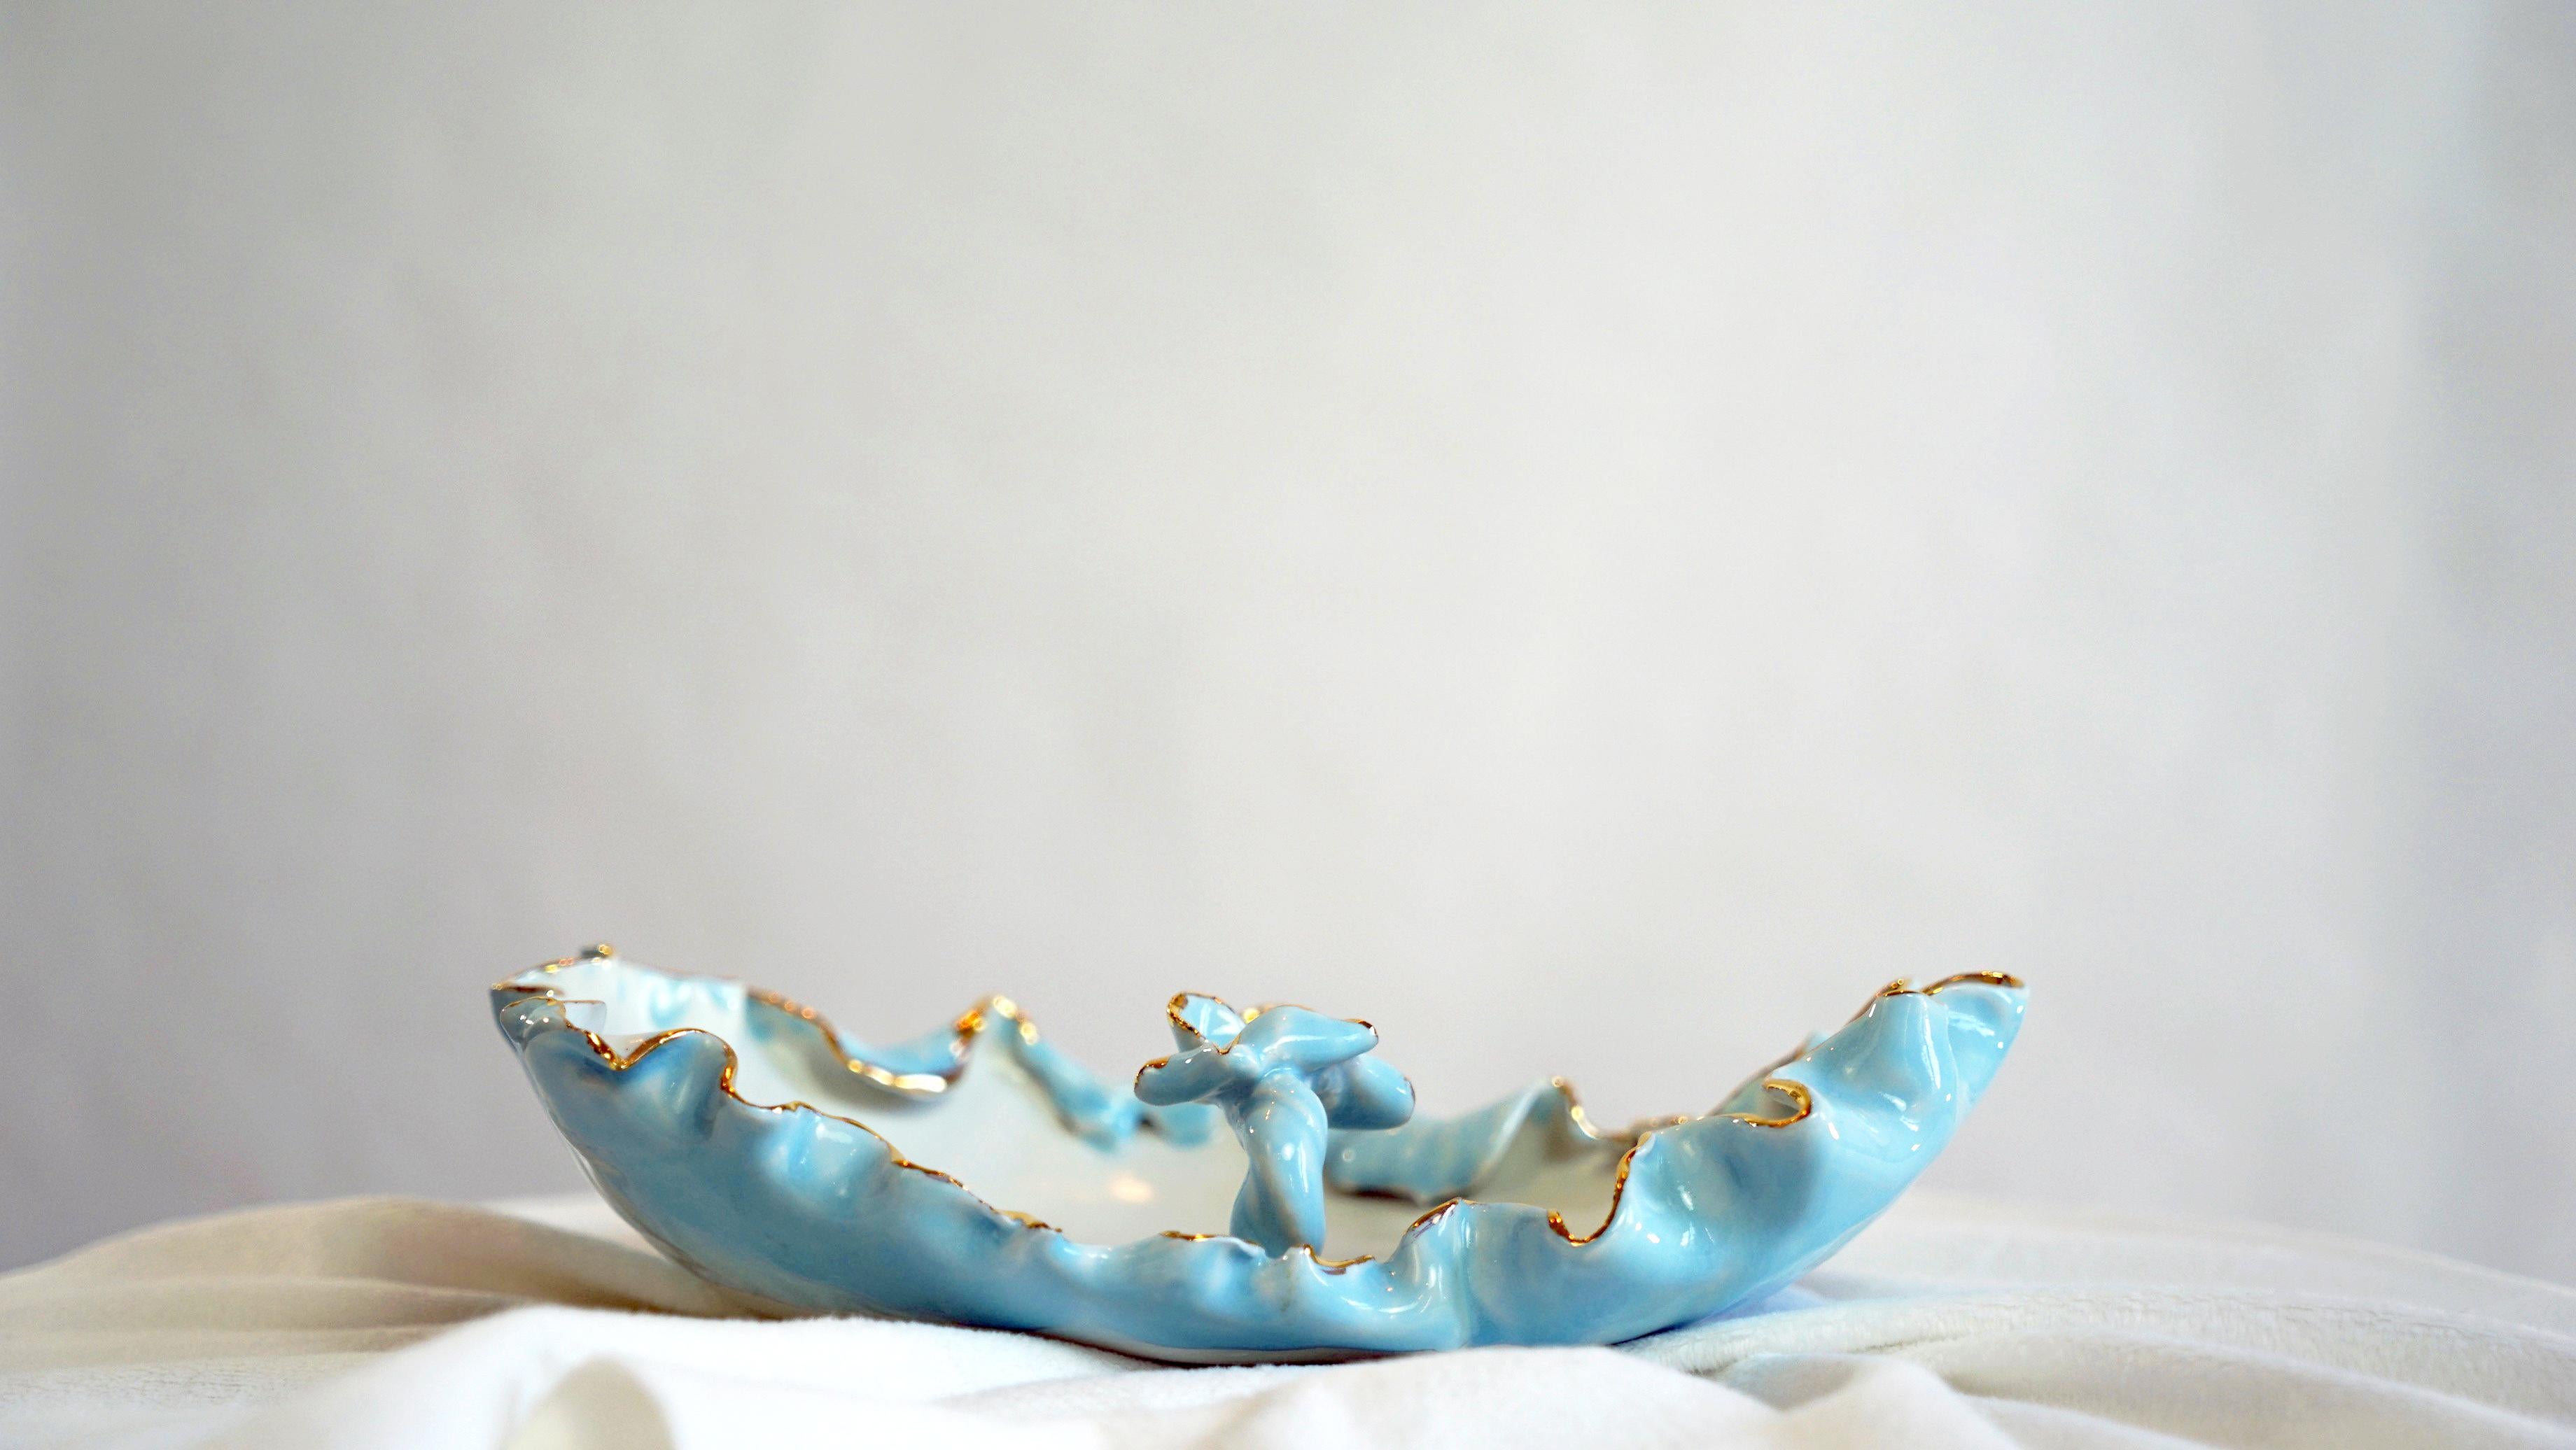 This is a numbered piece in fine porcelain designed and hand built by artist - designer Hania Jneid. Unique piece hand glazed and ornamented in Gold lustre. It is functional as well as sculptural. It is an value added to any space as a sculptural